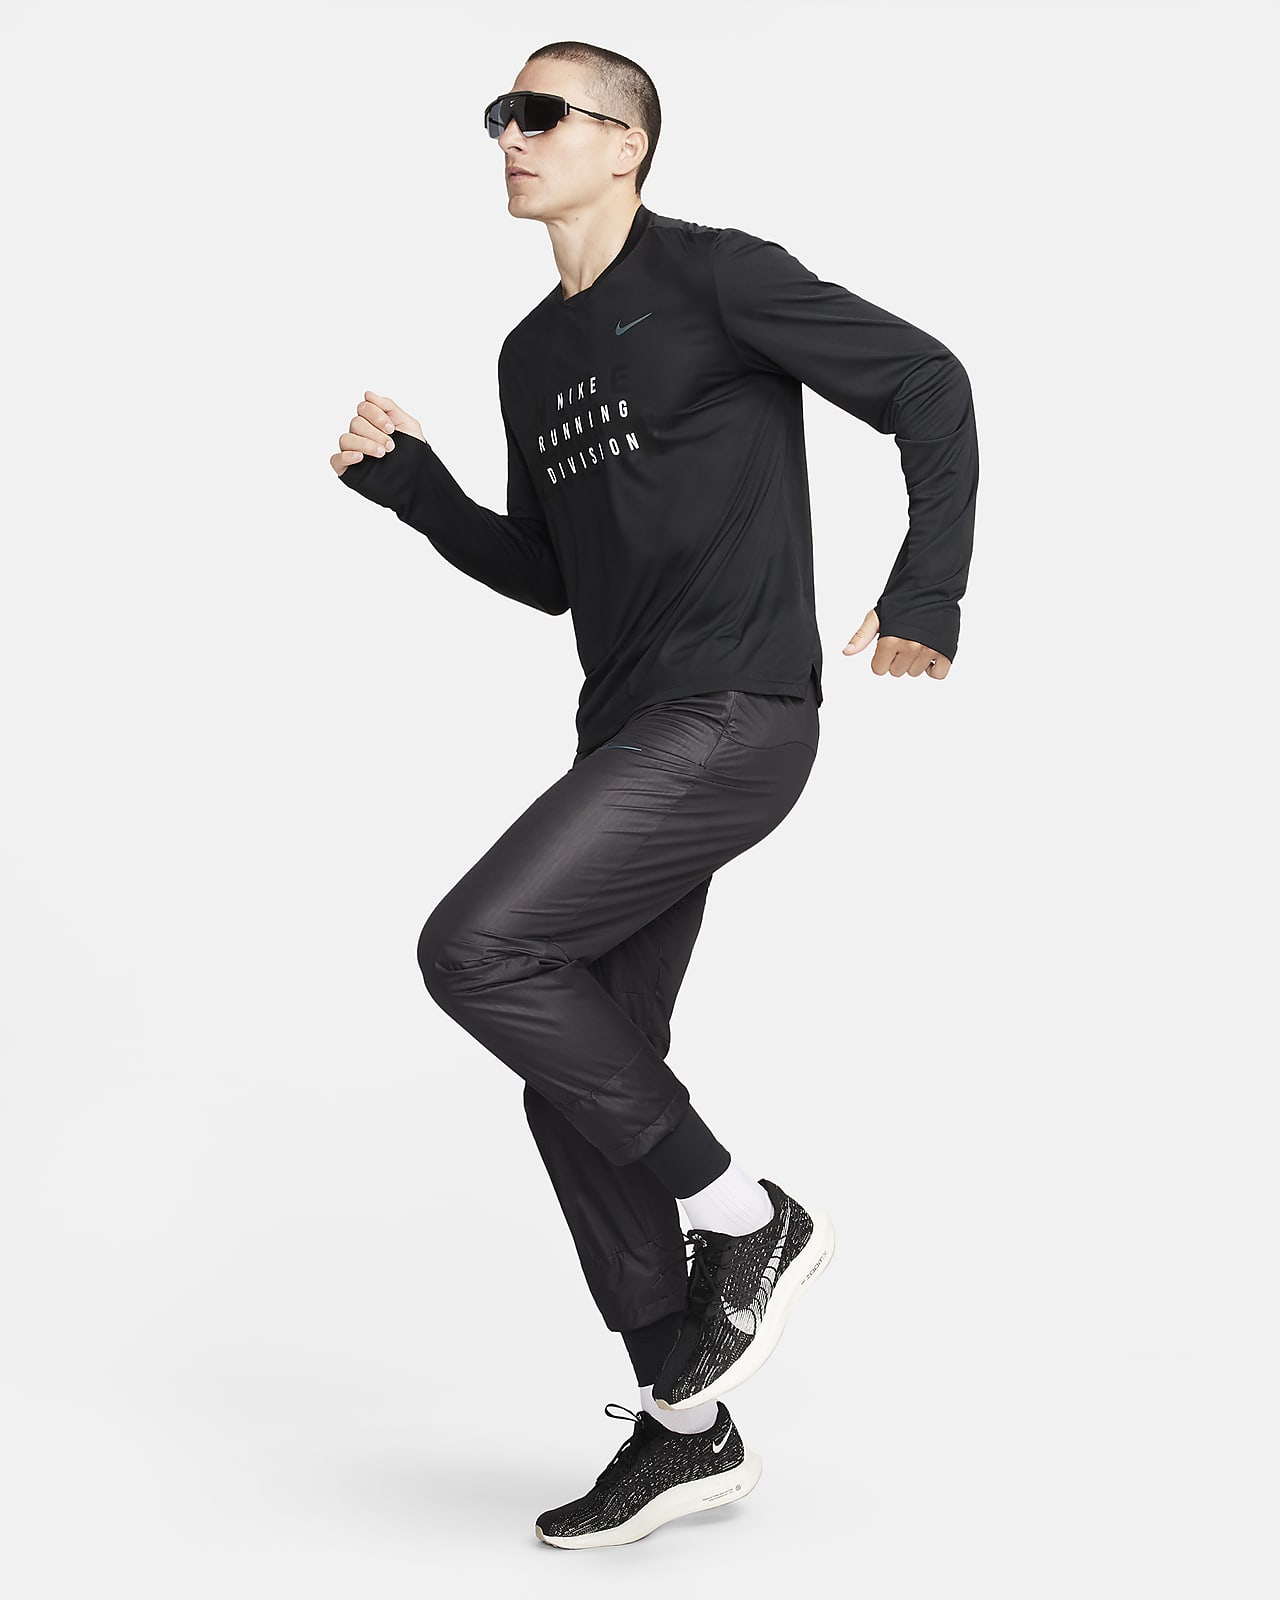 https://static.nike.com/a/images/t_PDP_1280_v1/f_auto,q_auto:eco/df5adfb1-8ea9-425b-b5b4-1f1f236bf964/running-division-phenom-running-trousers-SpJF0w.png